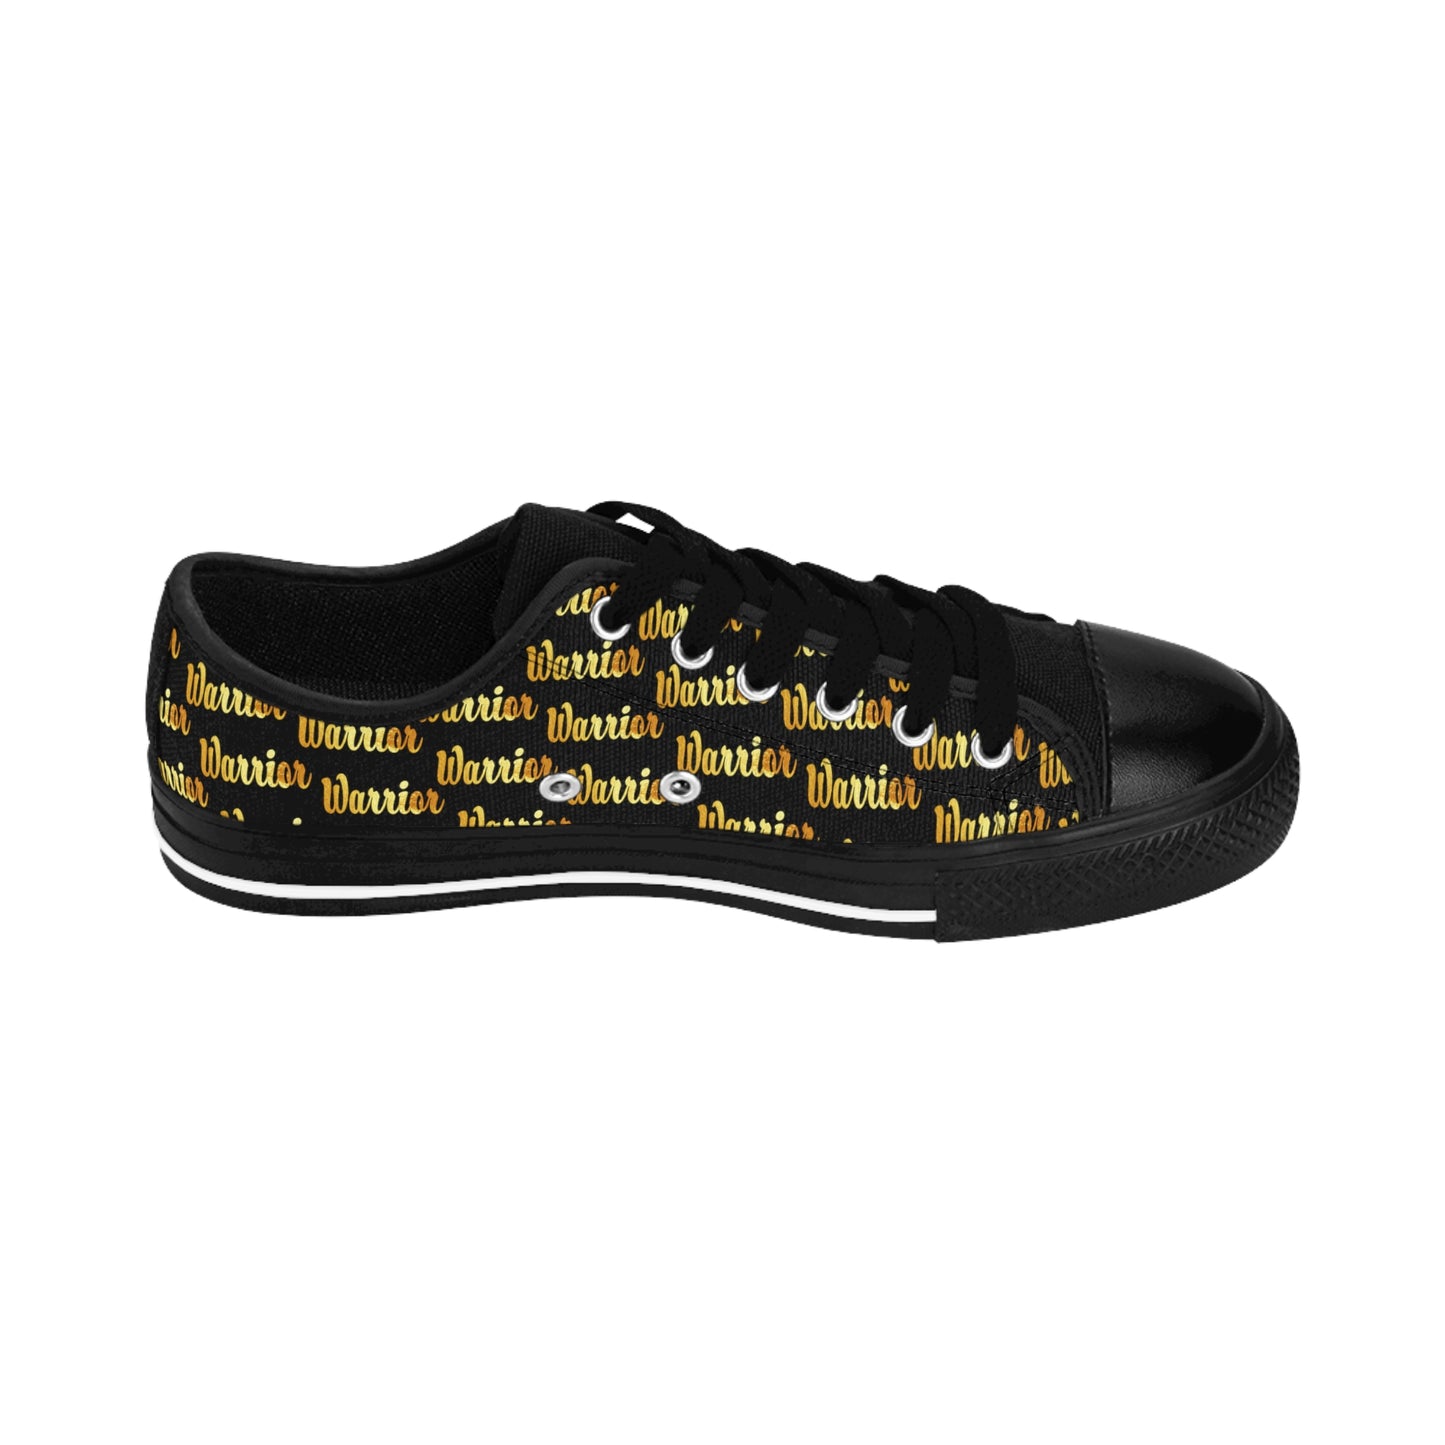 Men's - Gold and Bold Warrior - Sneakers (ptrn)